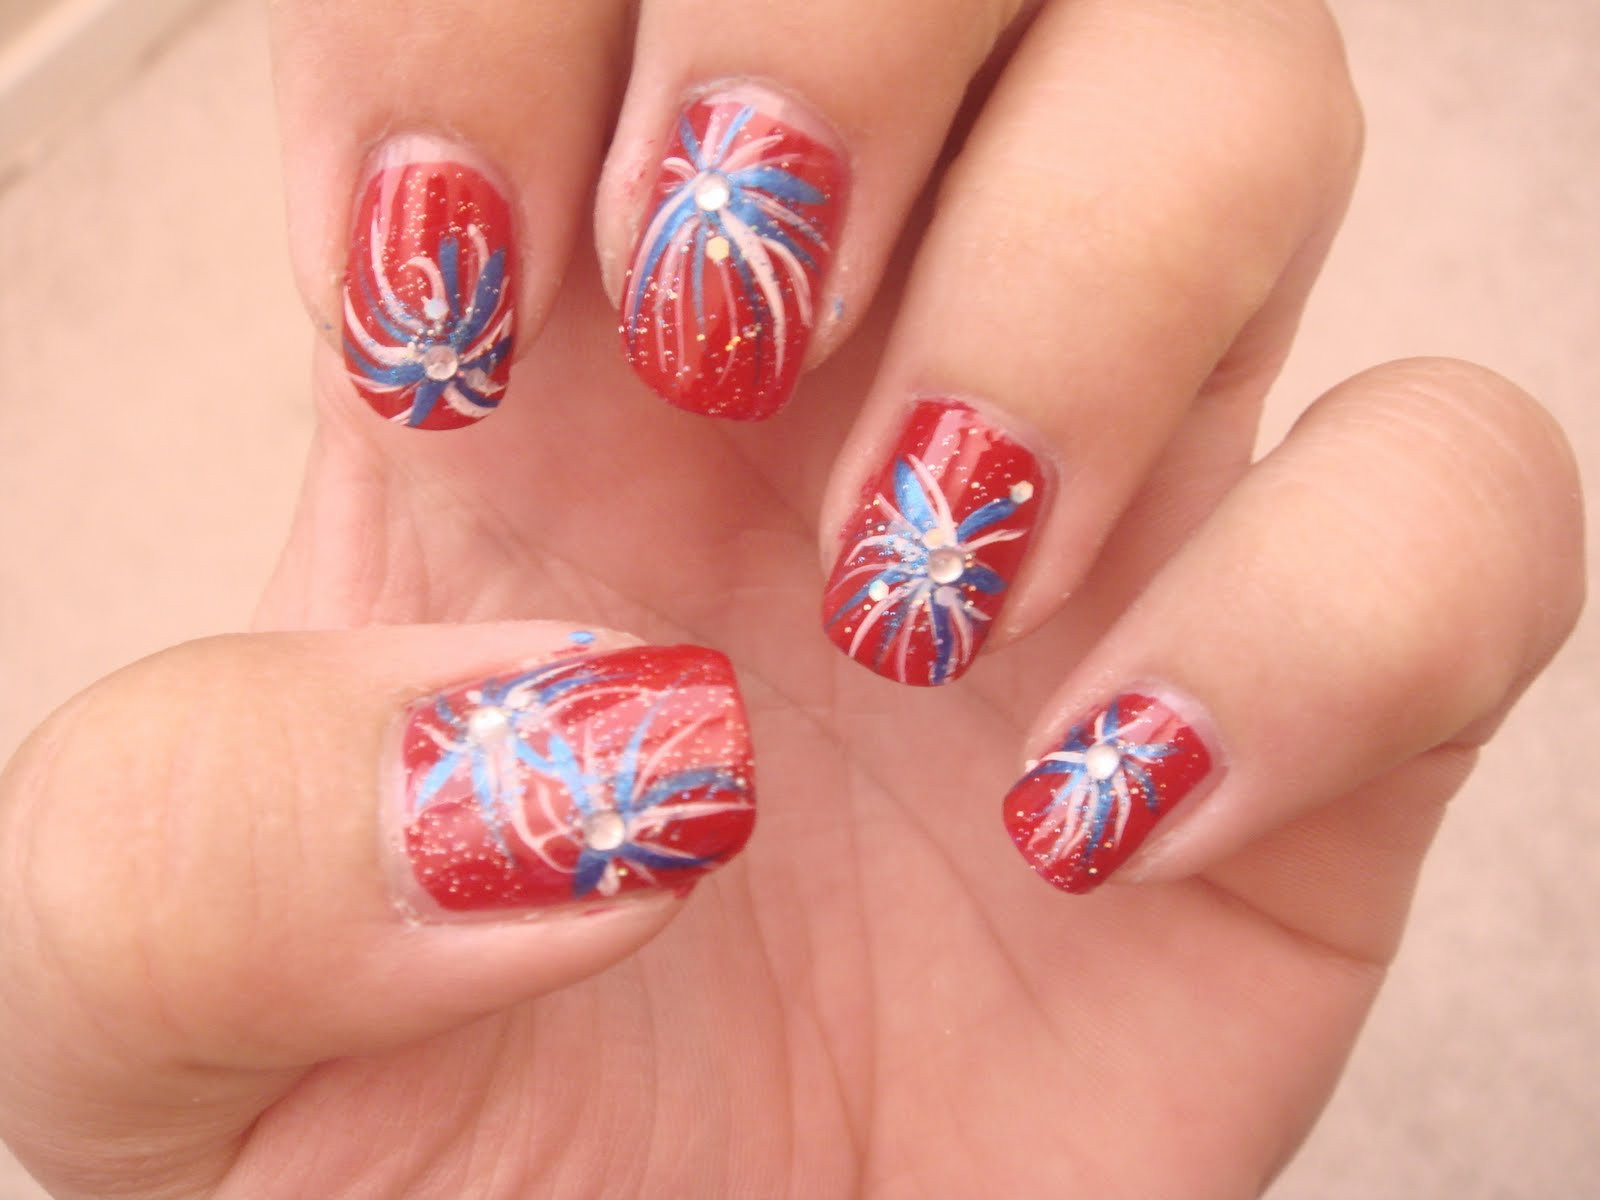 1. "July 4th Fireworks Nail Art Design Tutorial" - wide 1